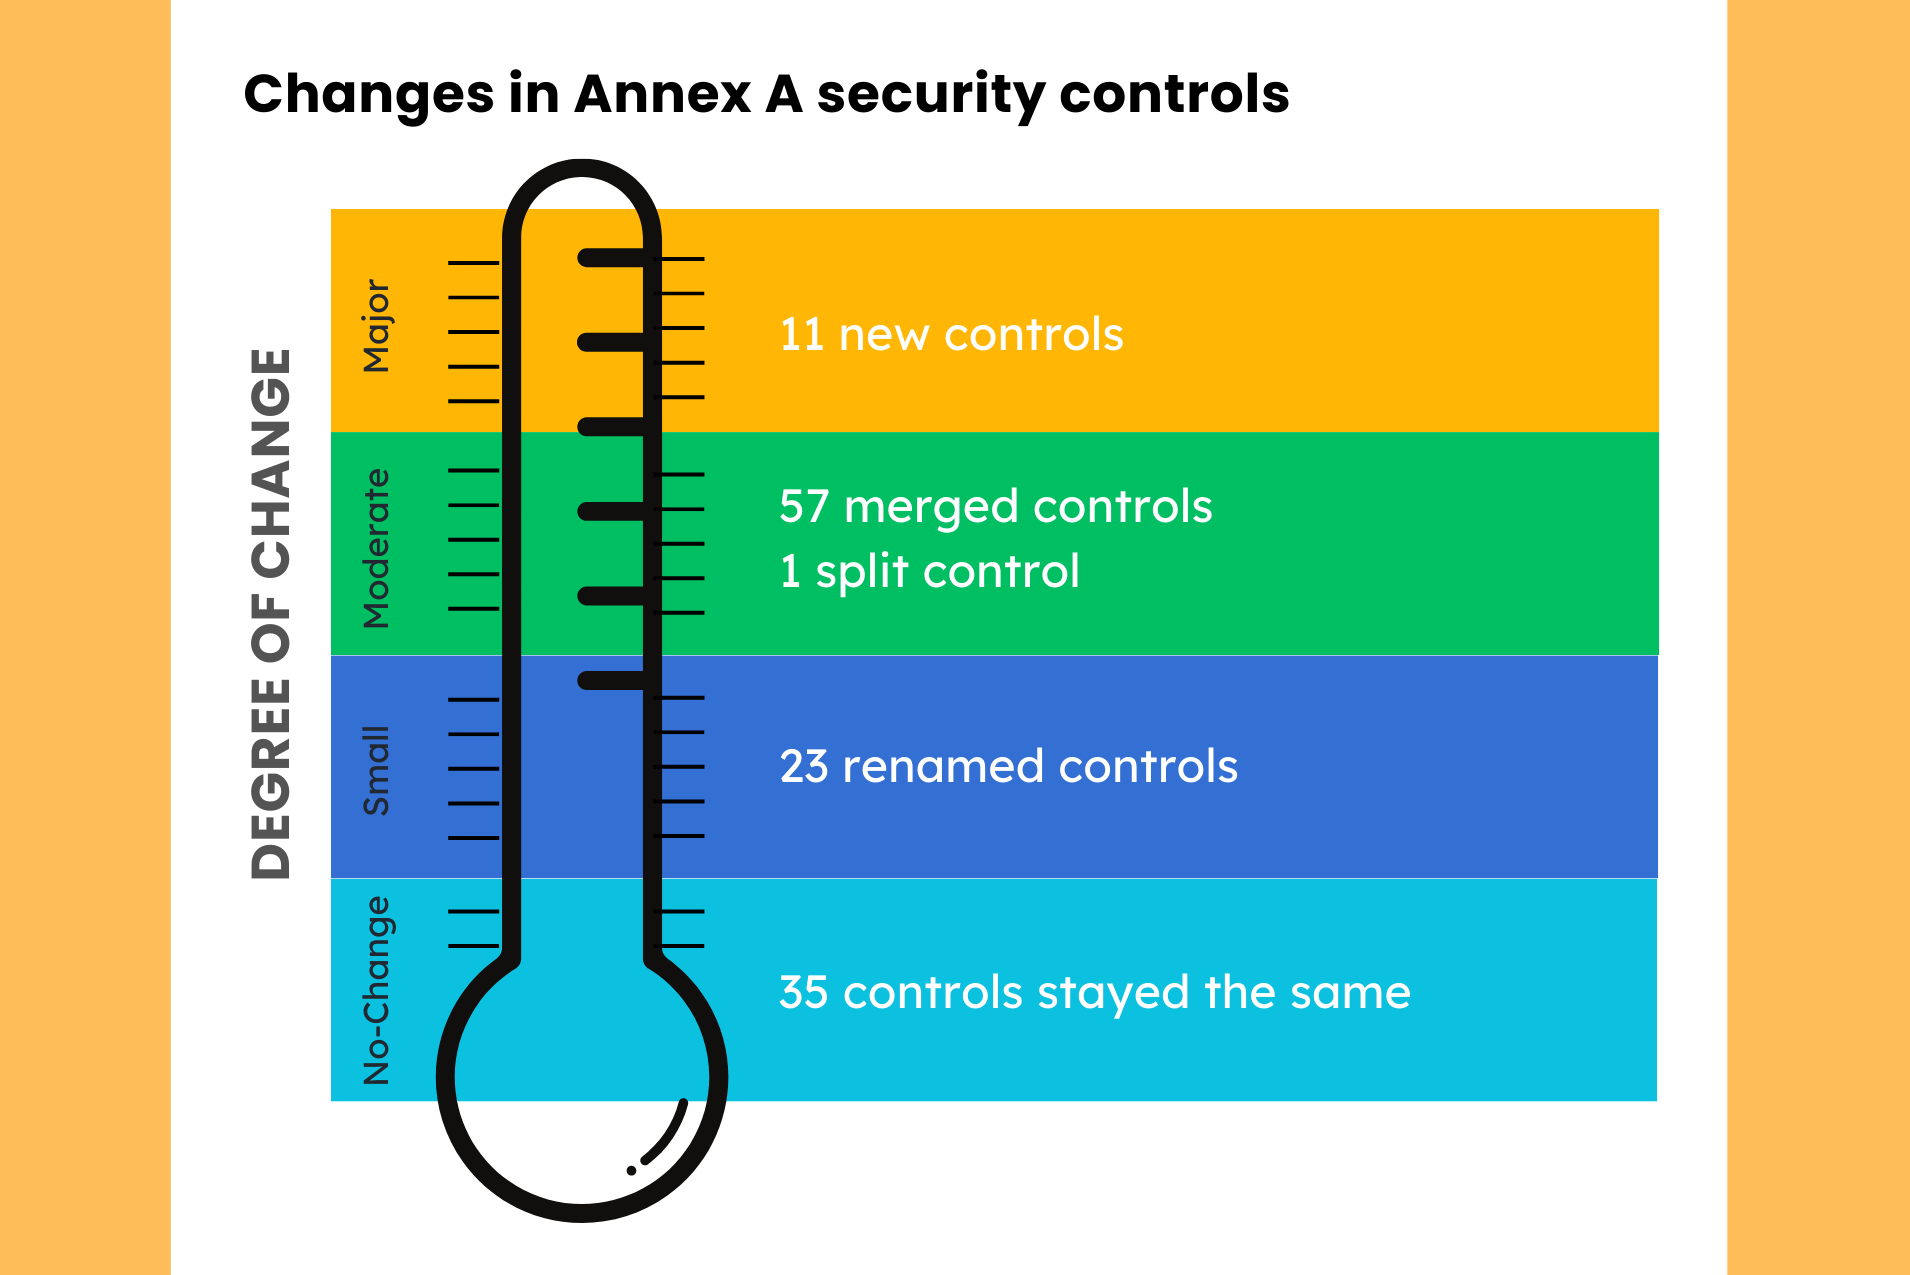 Changes in Annex A security controls in ISO 27001